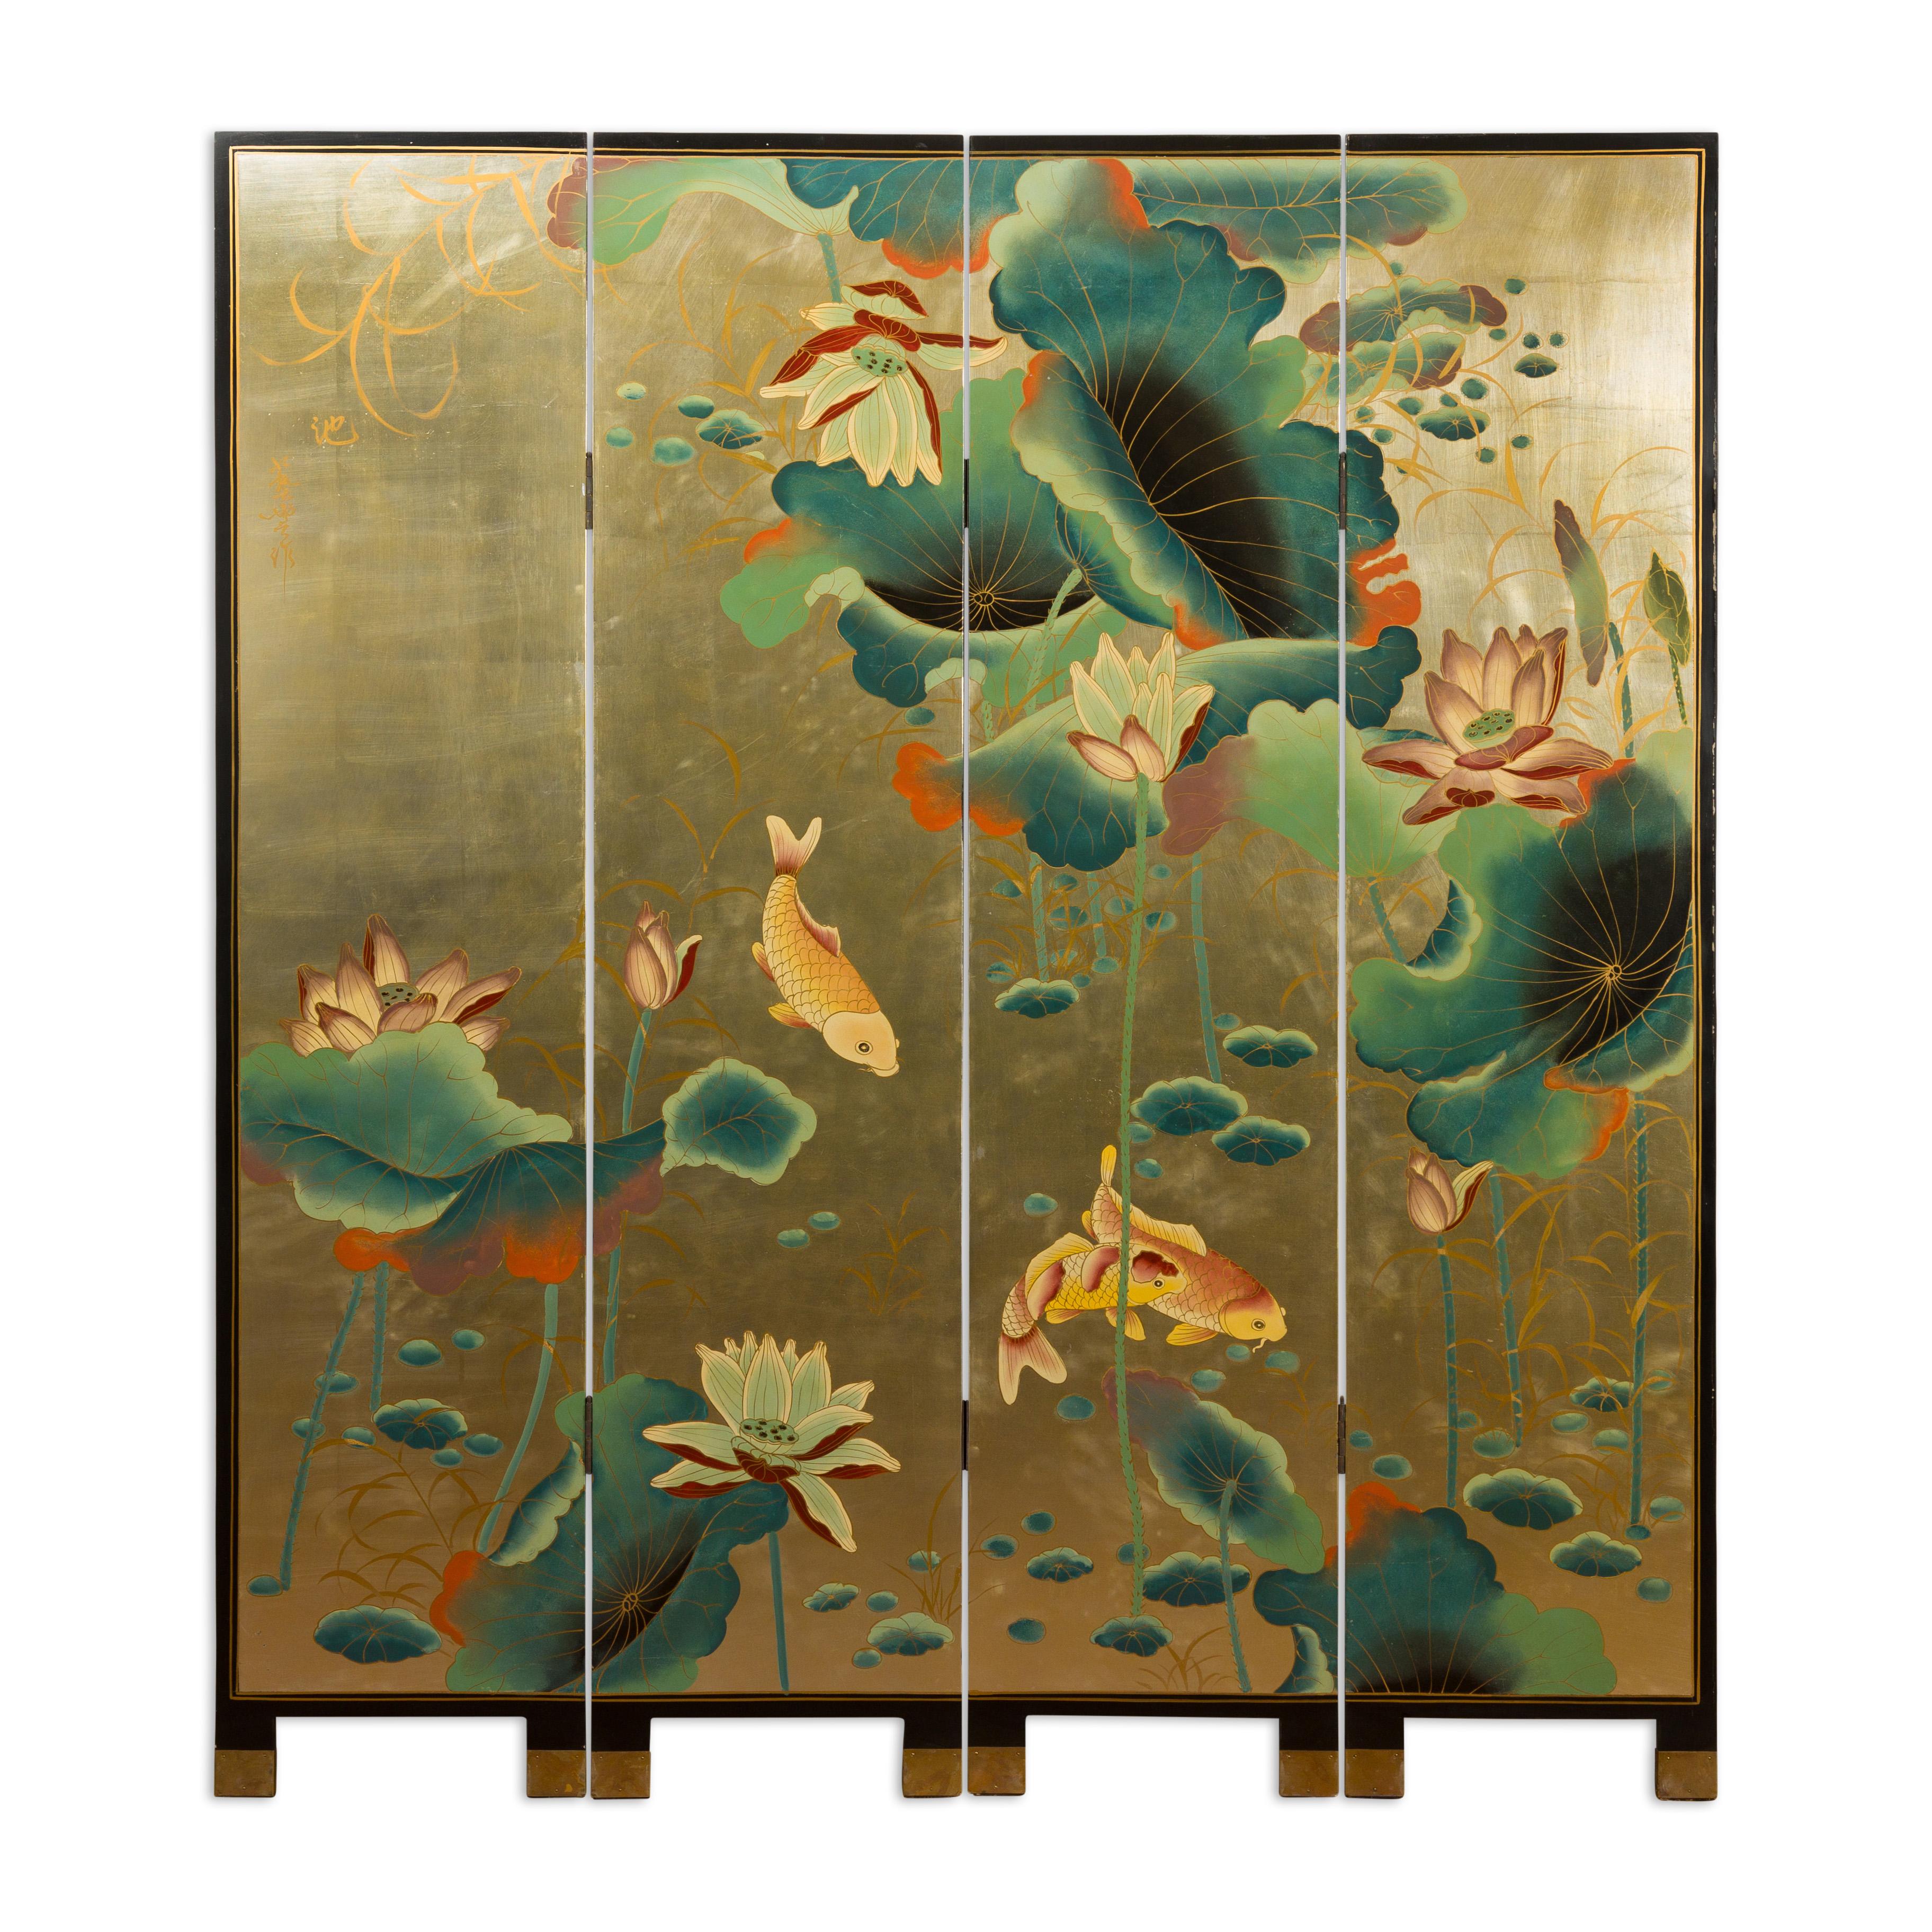 Chinese Antique Gold Leaf Koi Fish Floor Screen 12